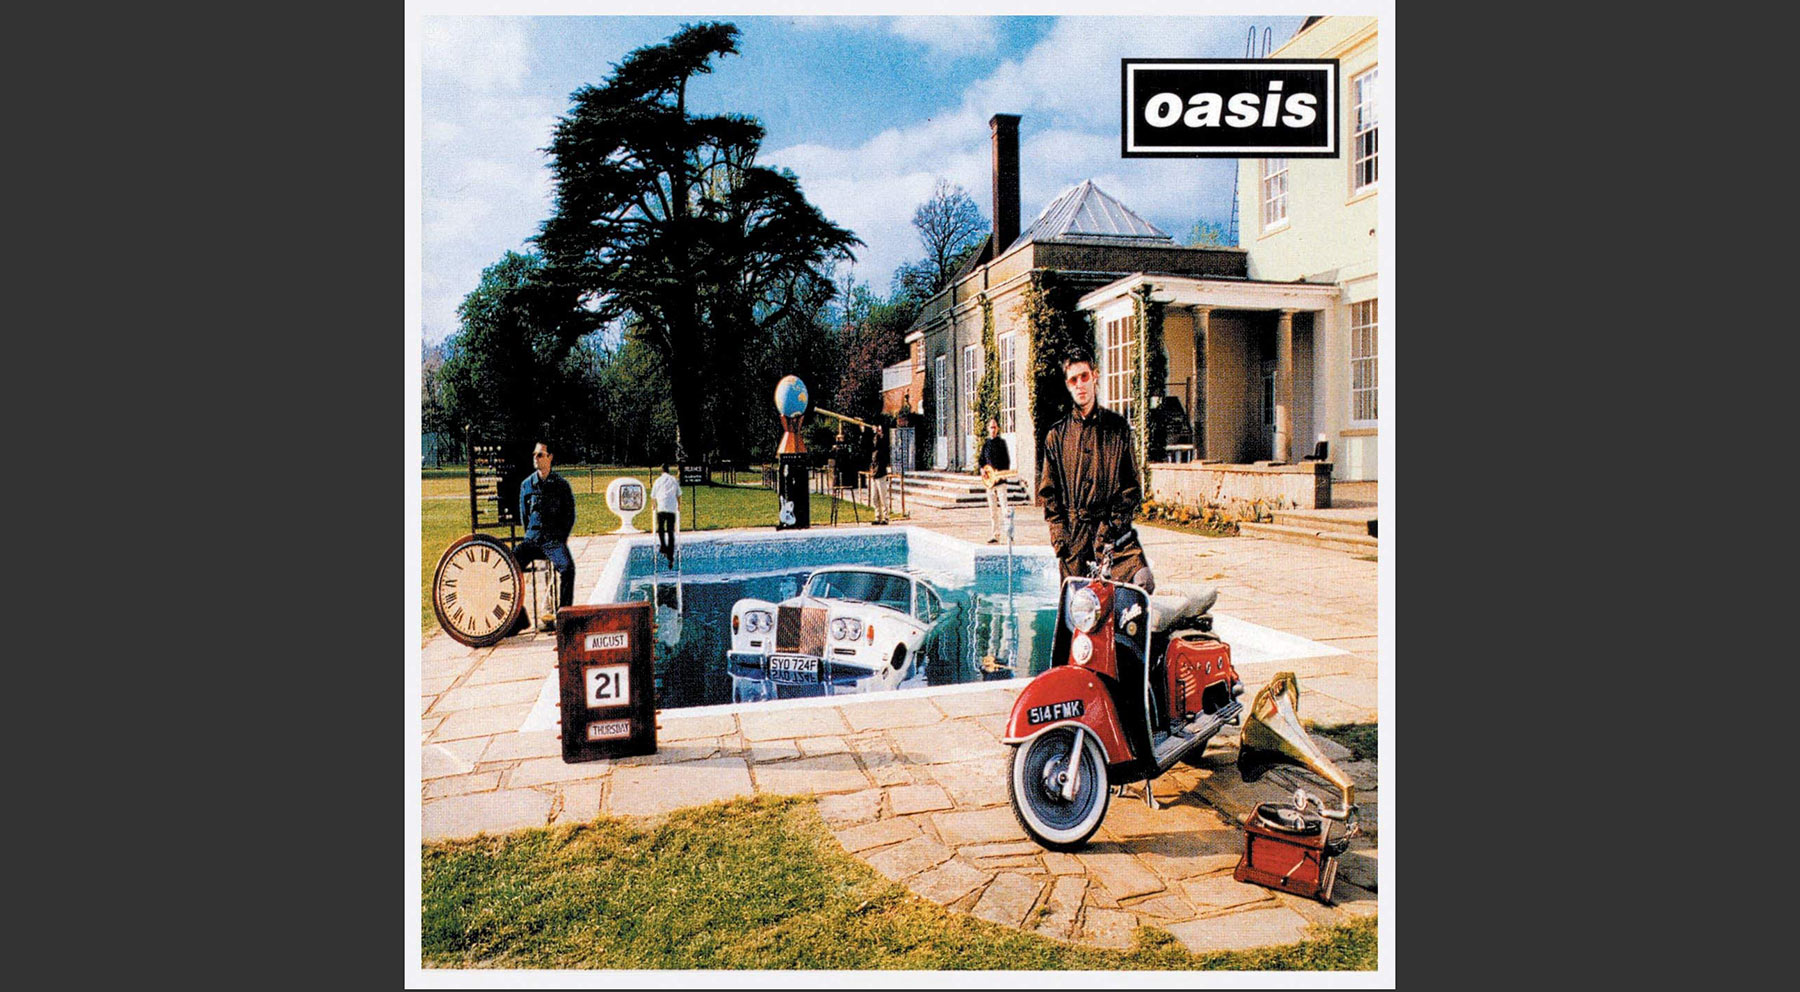 ‘Be here now’ // Oasis (1997)